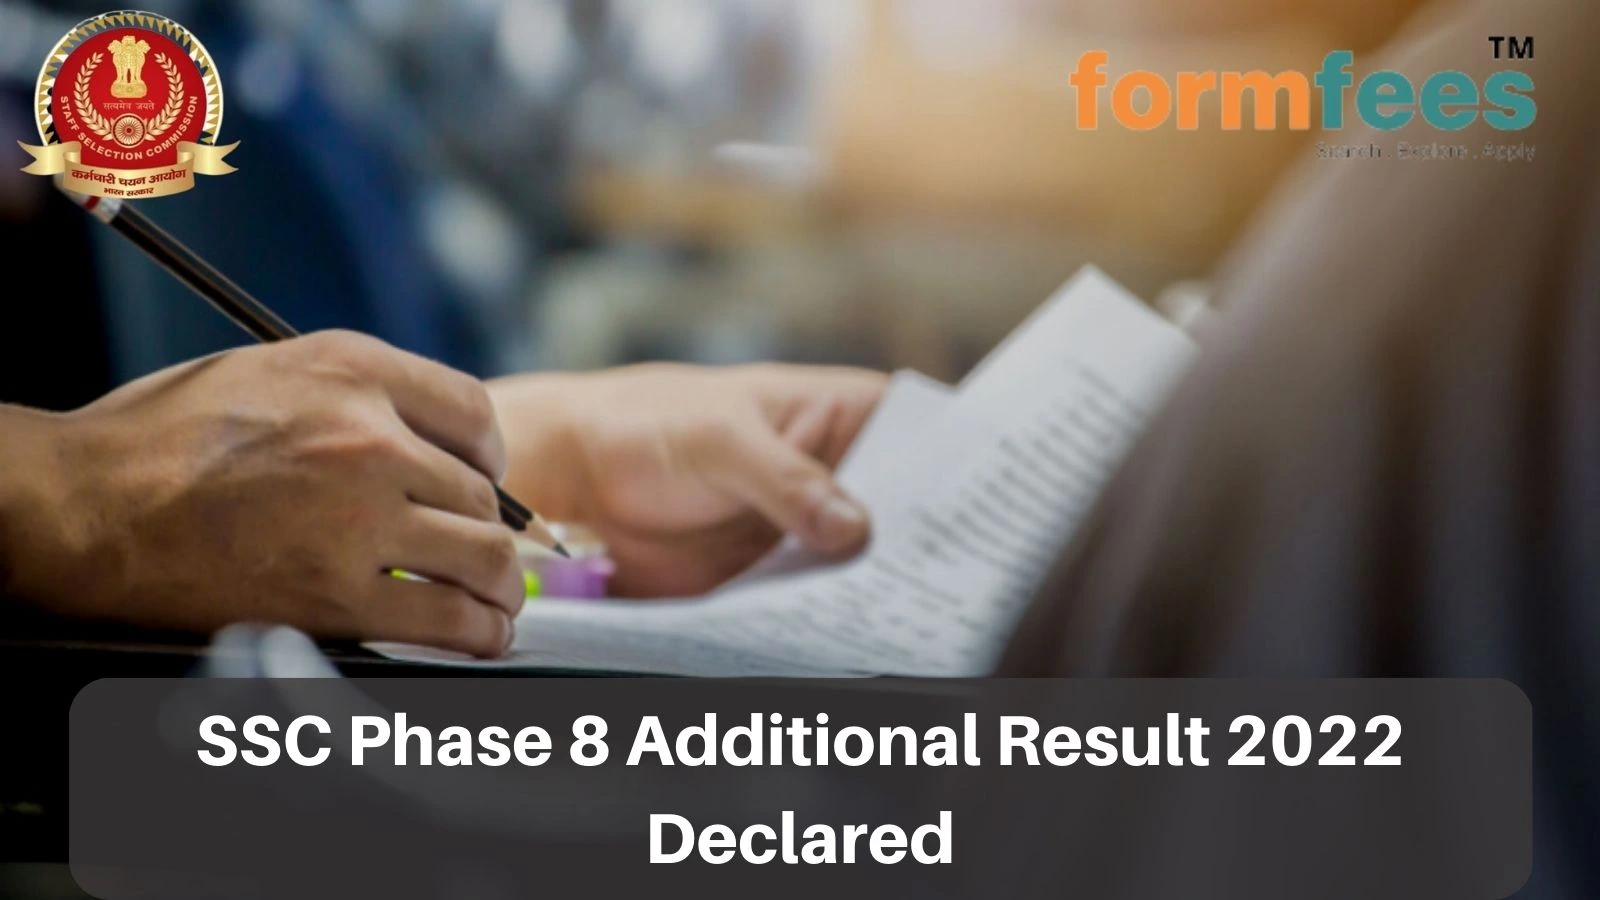 SSC Phase 8 Additional Result 2022 Declared